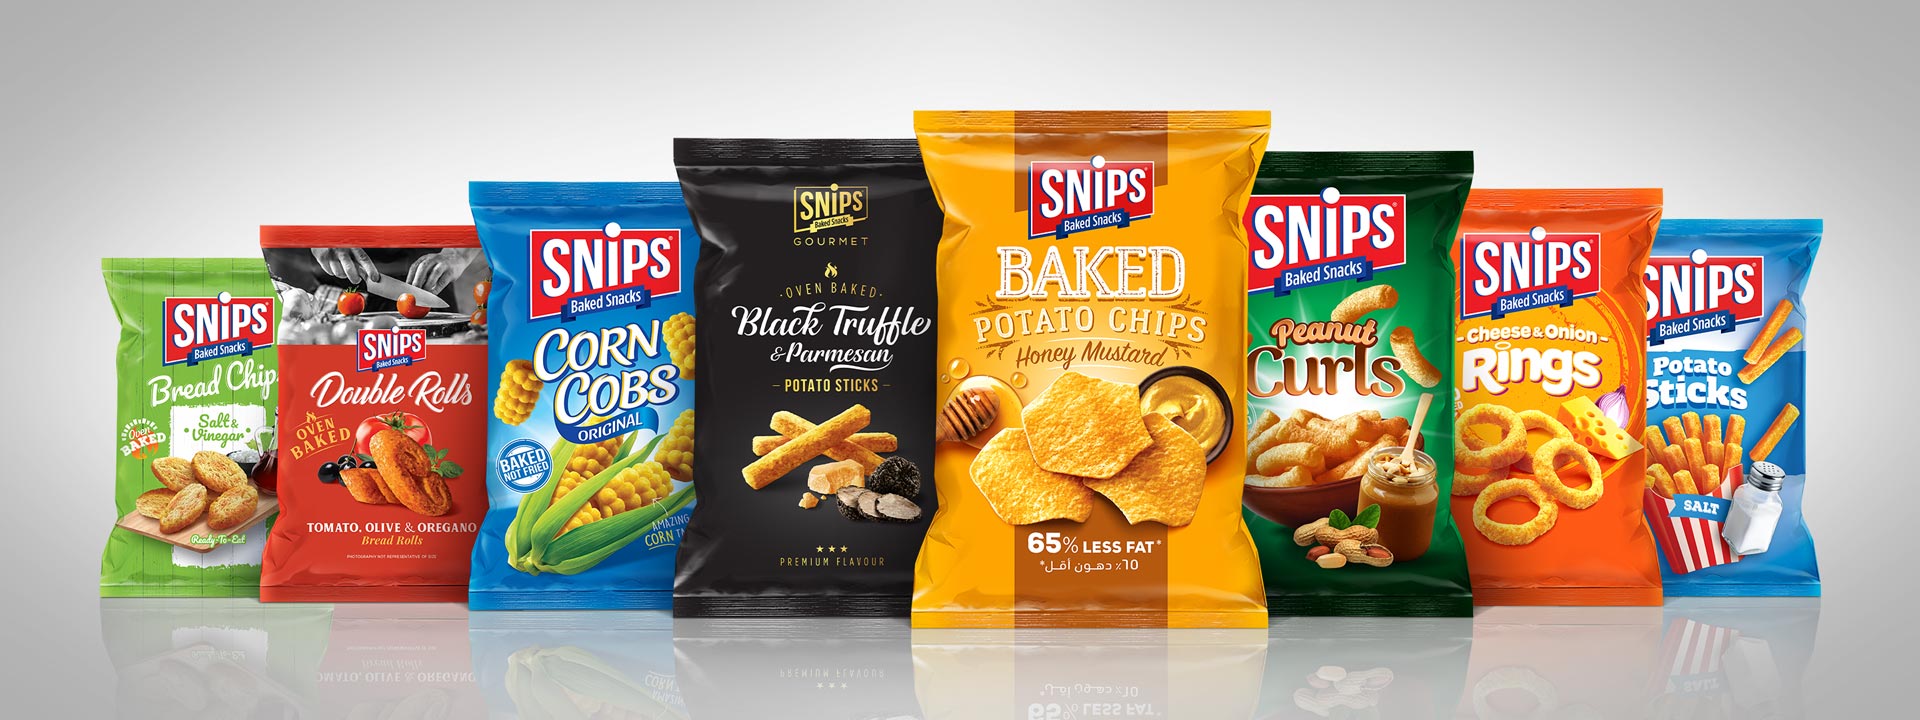 SNIPS Product Lineup - Baked Potatoes - Potato Sticks - Corn Cobs - Onion Rings - Double Rolls - Curls - Bread Chips - Gourmet